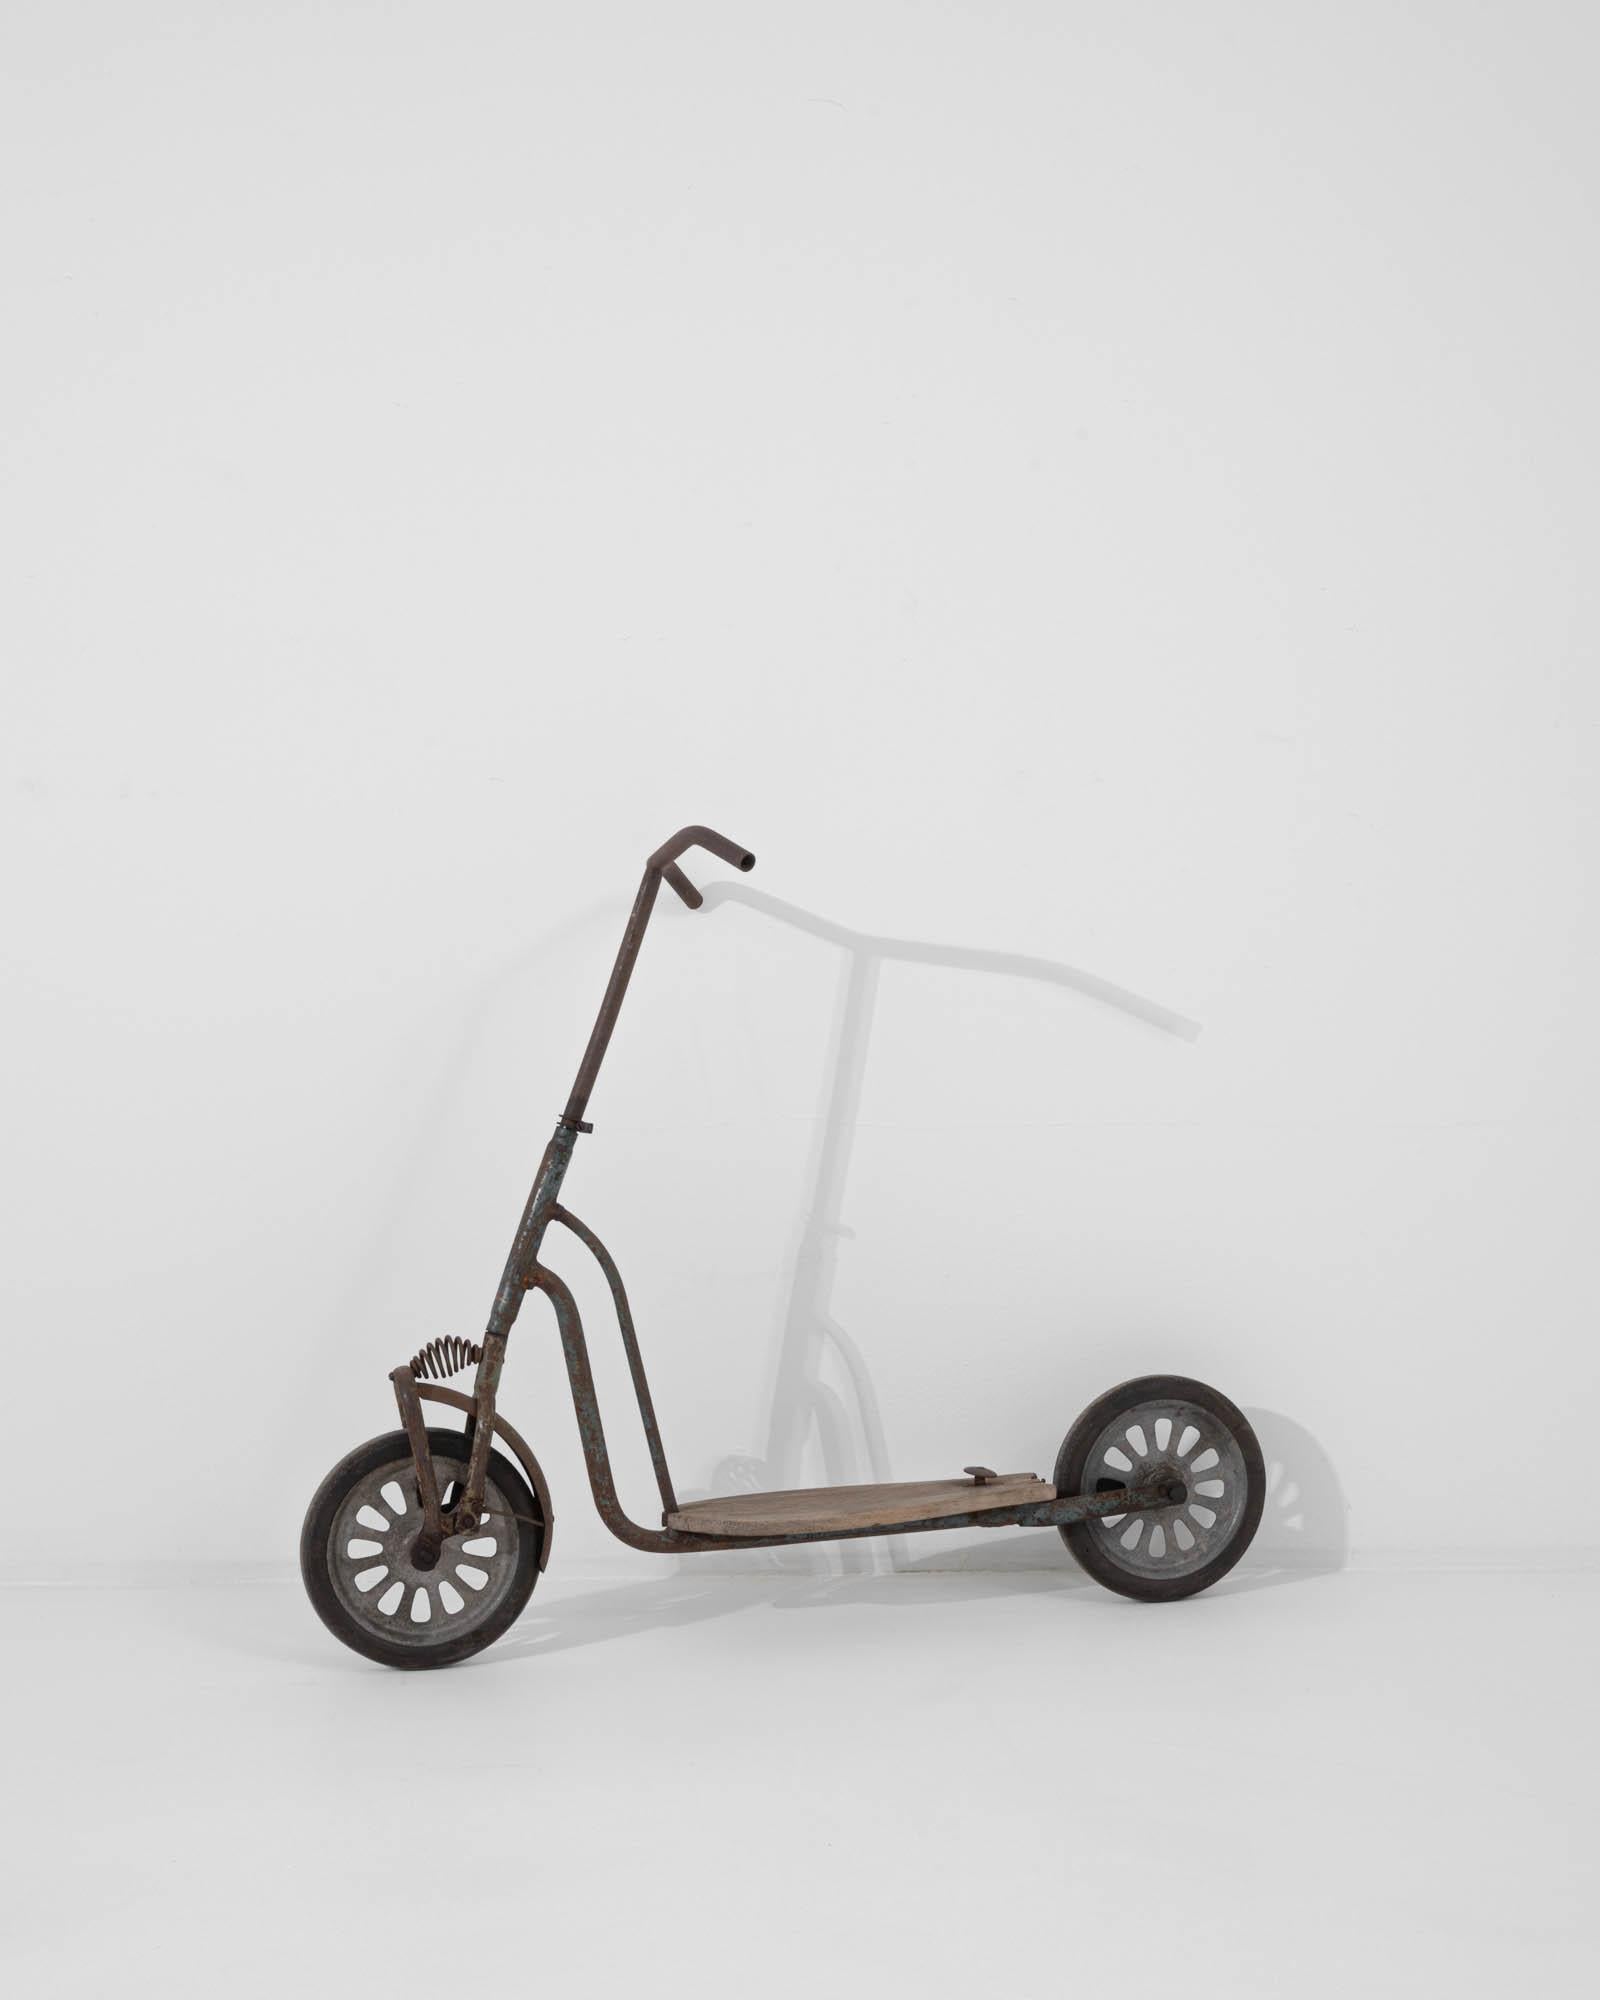 Step back in time with this authentic 1950s Central European Metal and Wooden Scooter, a whimsical piece that captures the playful spirit of yesteryears. Its sturdy construction features a combination of robust metal and solid wood, telling the tale